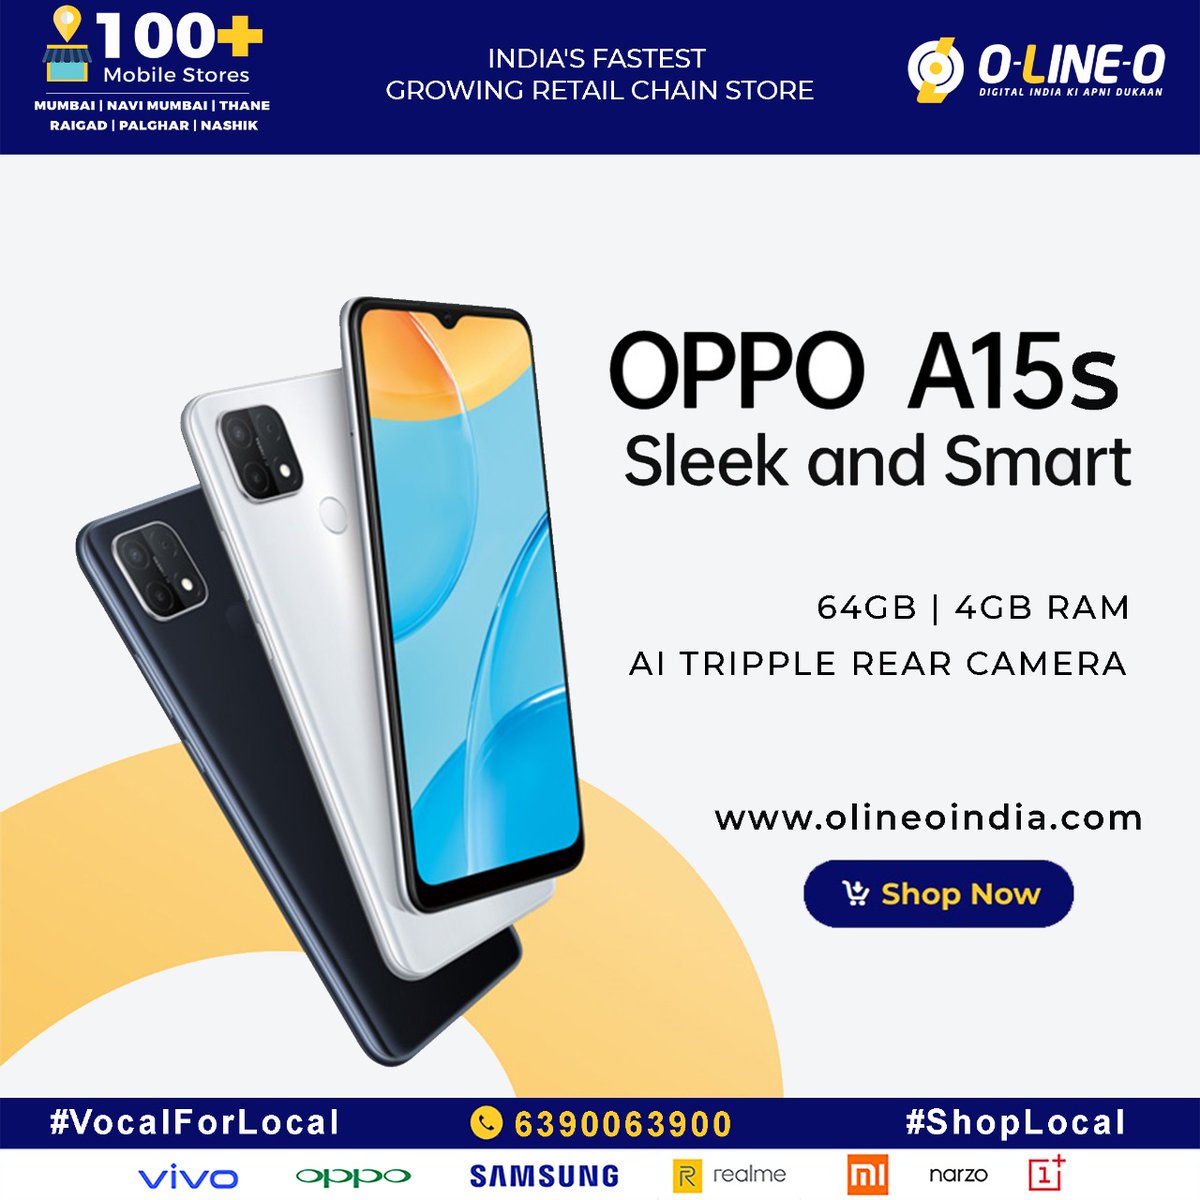 OPPO A15s' sleek build and triple rear camera, enhanced by AI gives you the confidence to live your best.

olineoindia.com
Buy Now : bit.ly/3g5qxea

#OppoIndia #Olineo #DigitalIndiaKiApniDukan #ContactlessDelivery #StayHomeStaySafe
 #Mumbai